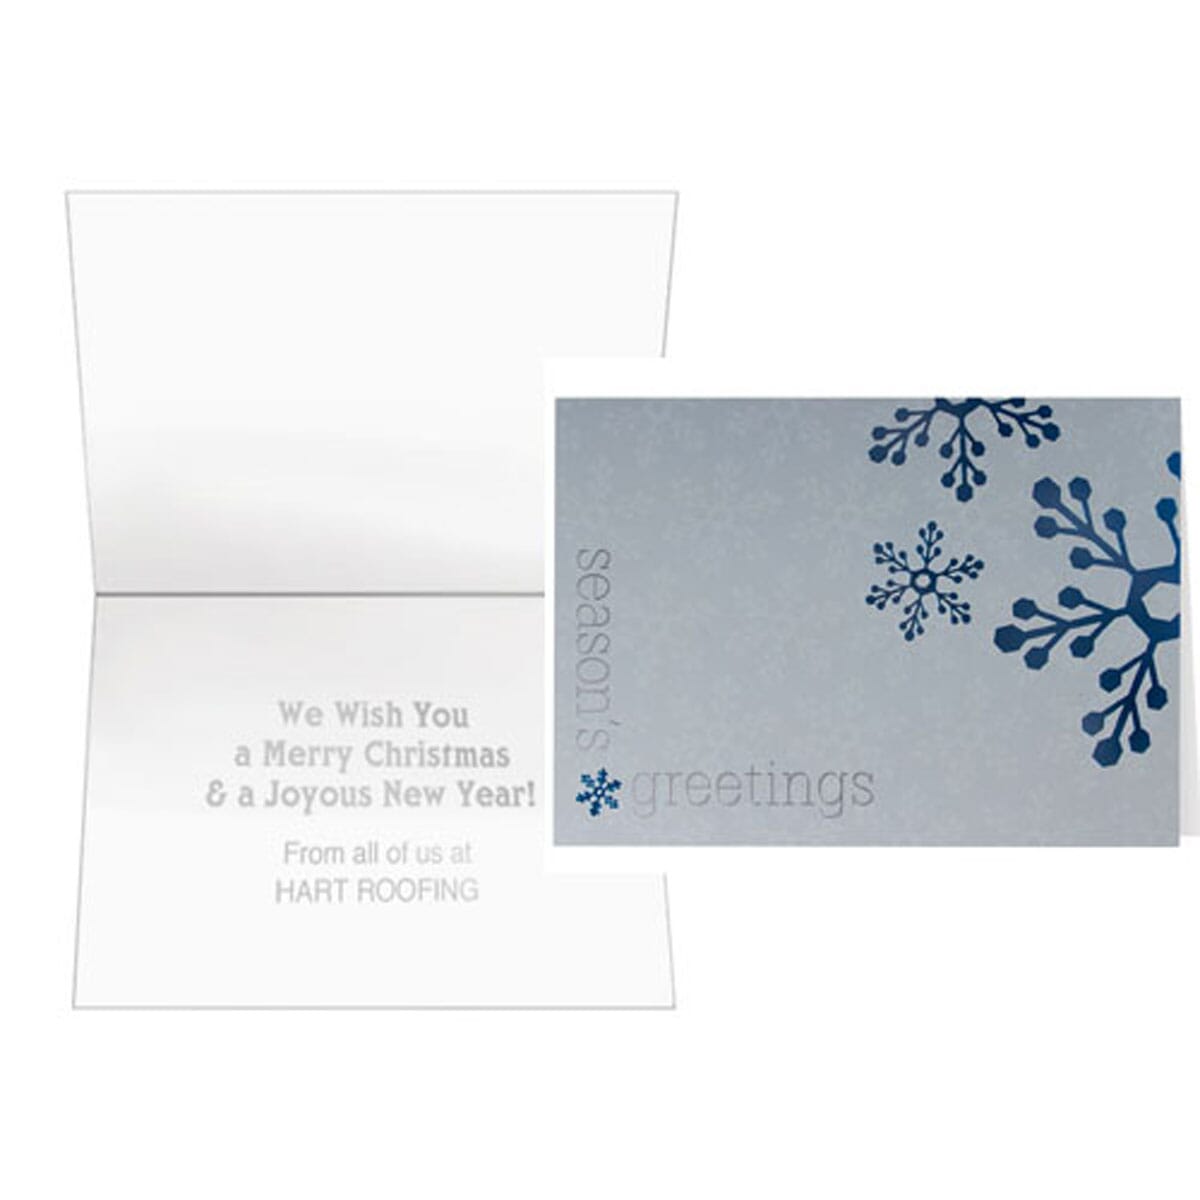 Blue Snowflakes On Silver Greeting Card